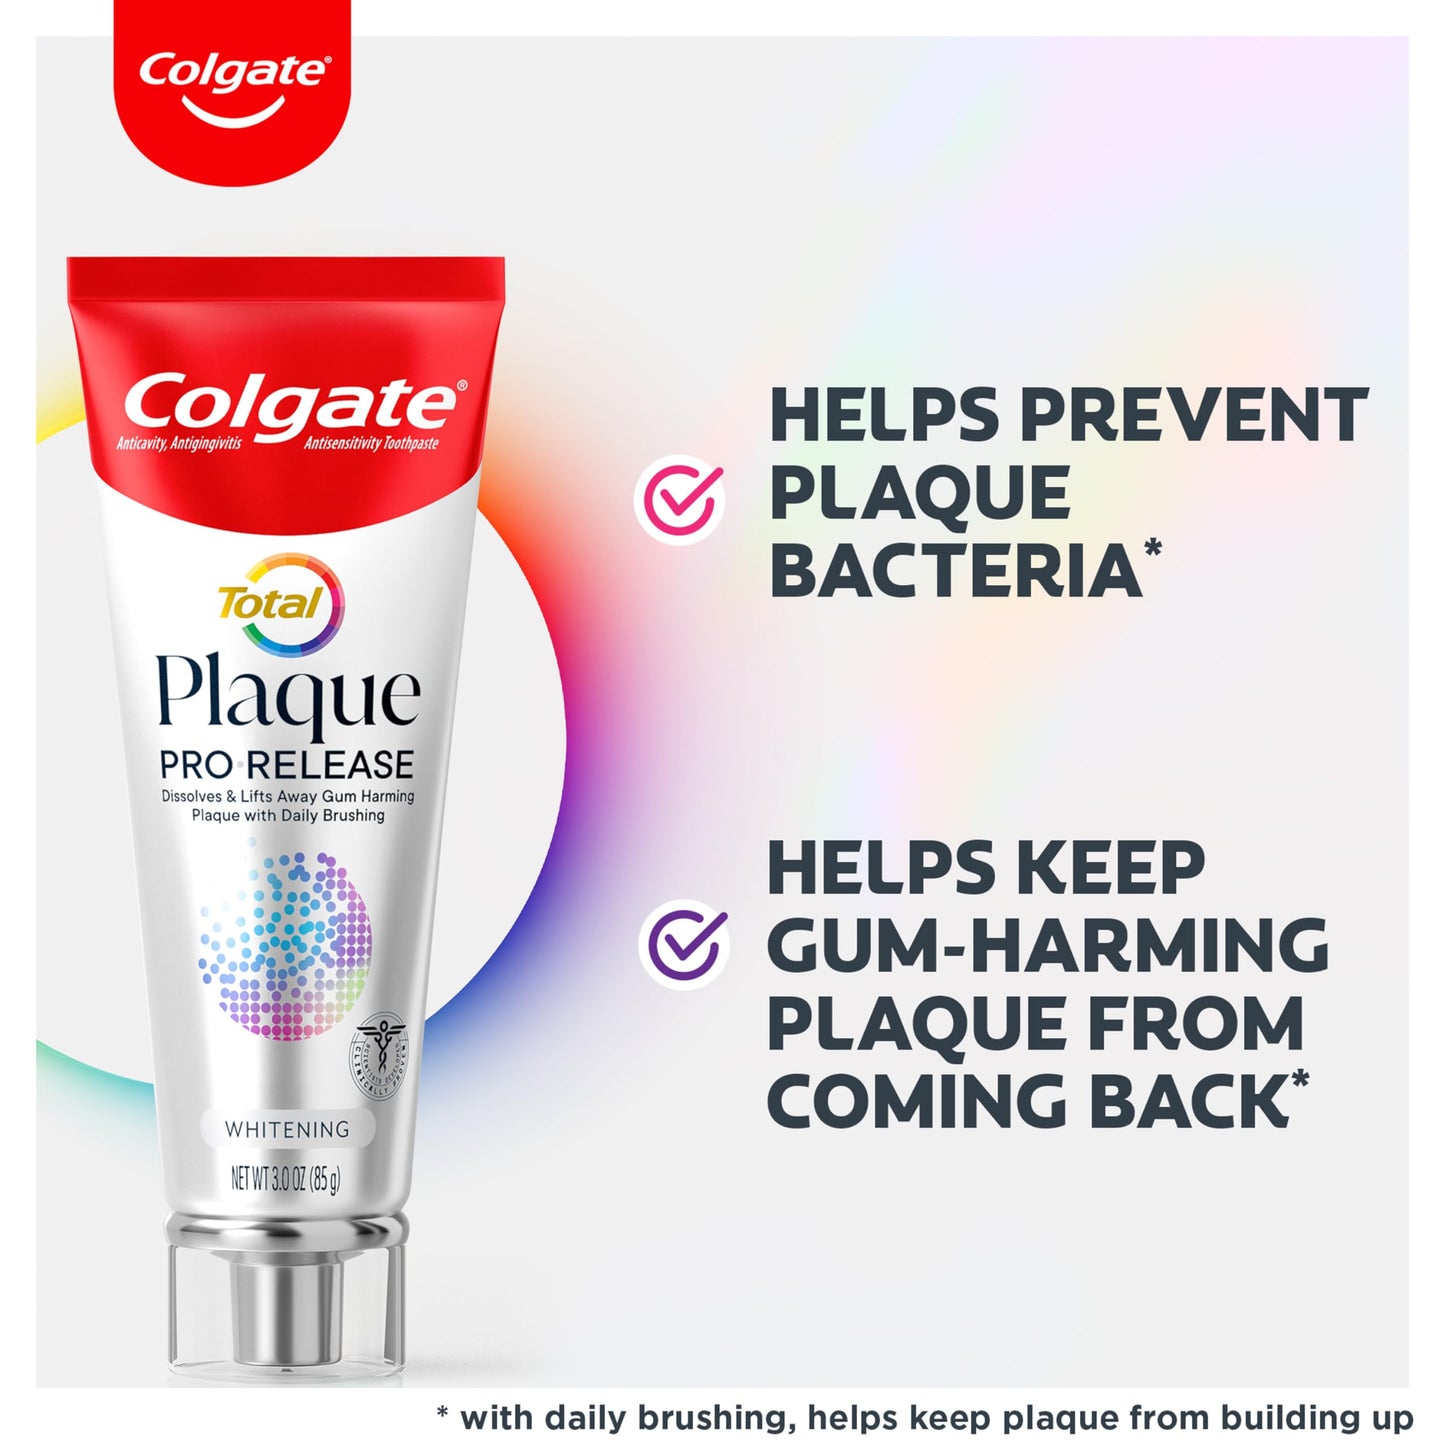 Colgate Total Plaque Pro Release Whitening Toothpaste, Whitening Anticavity Toothpaste, Helps Reduce Plaque and Whitens Teeth, 1 Pack, 3.0 Oz Tube